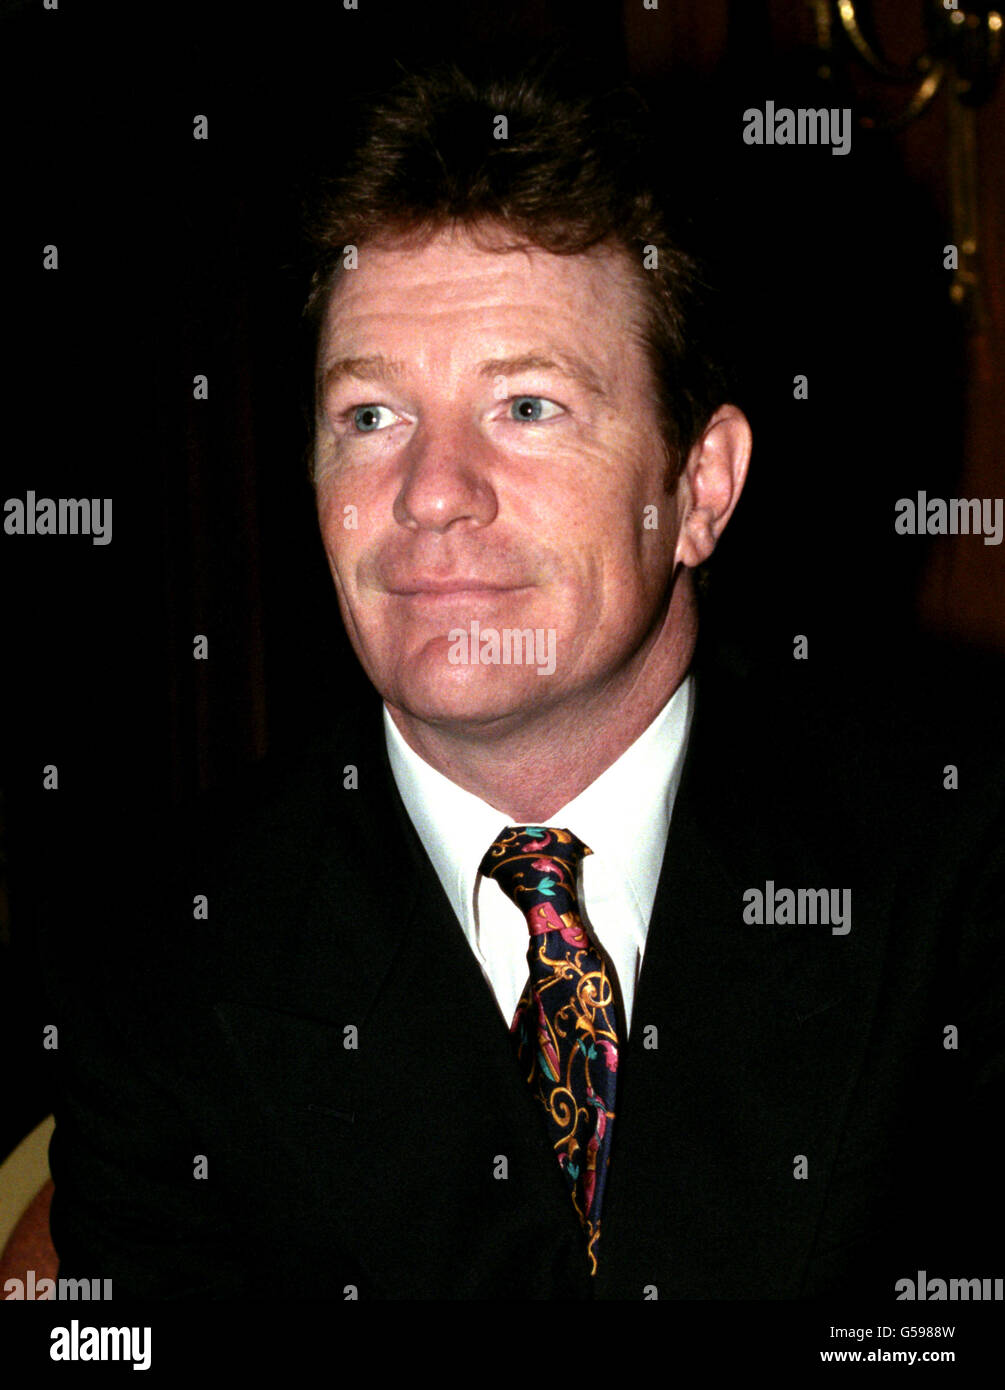 Comedian Jim Davidson, after he was named Showbusiness Personality of Year, at the Variety Club Awards in London. 12/12/97: Celebrates his birthday on 13/12/97. R/I: 25/01/01. Stock Photo